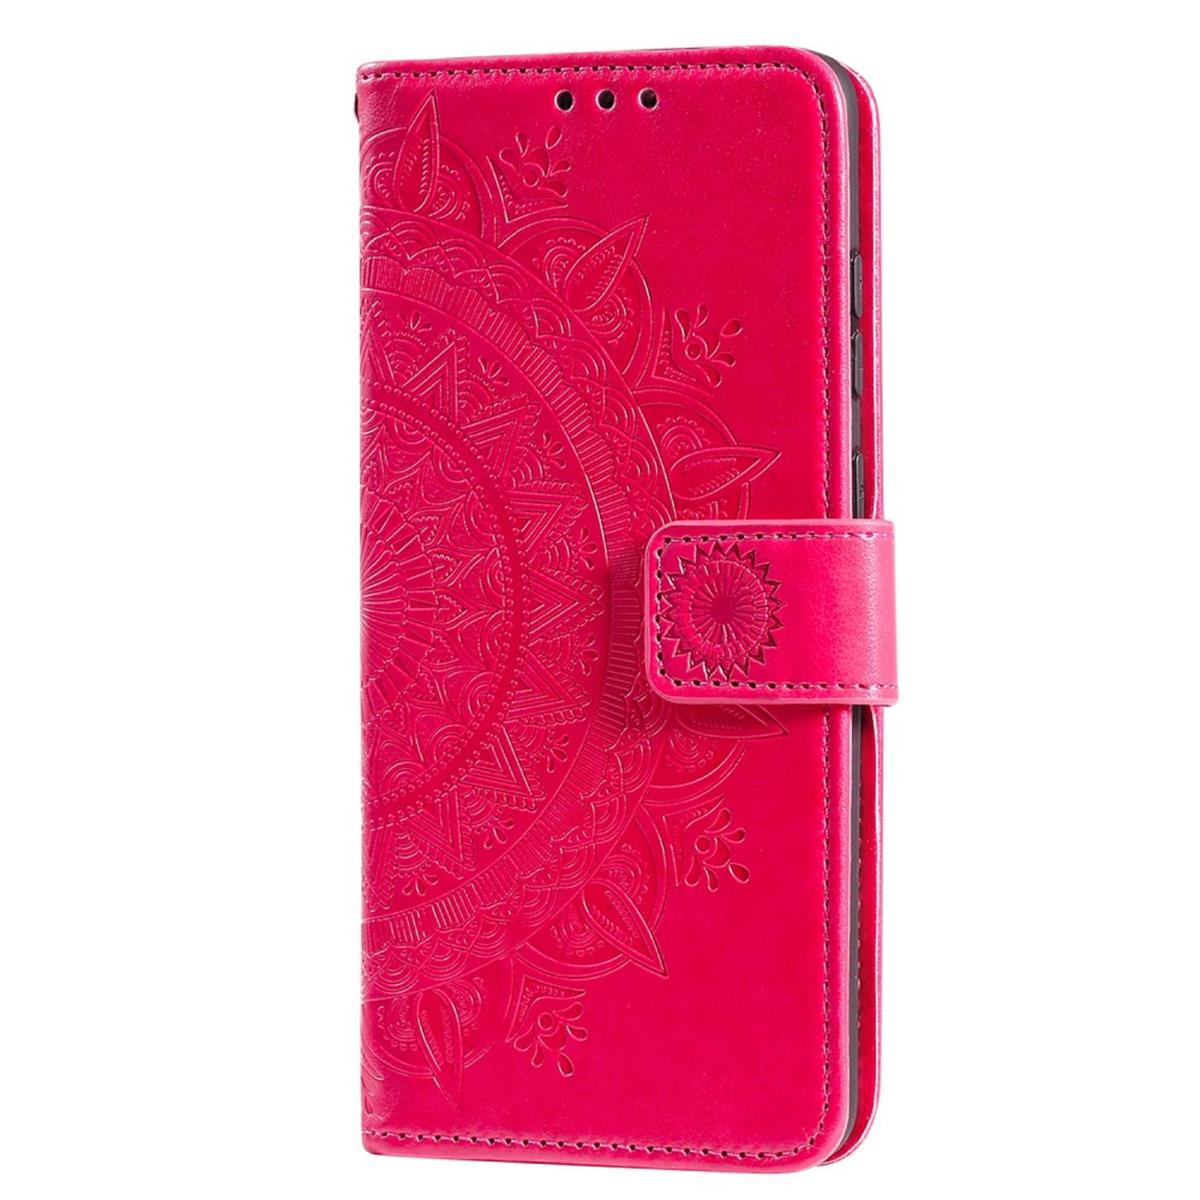 COVERKINGZ Klapphülle mit Galaxy Mandala Bookcover, Muster, Samsung, A02s, Pink